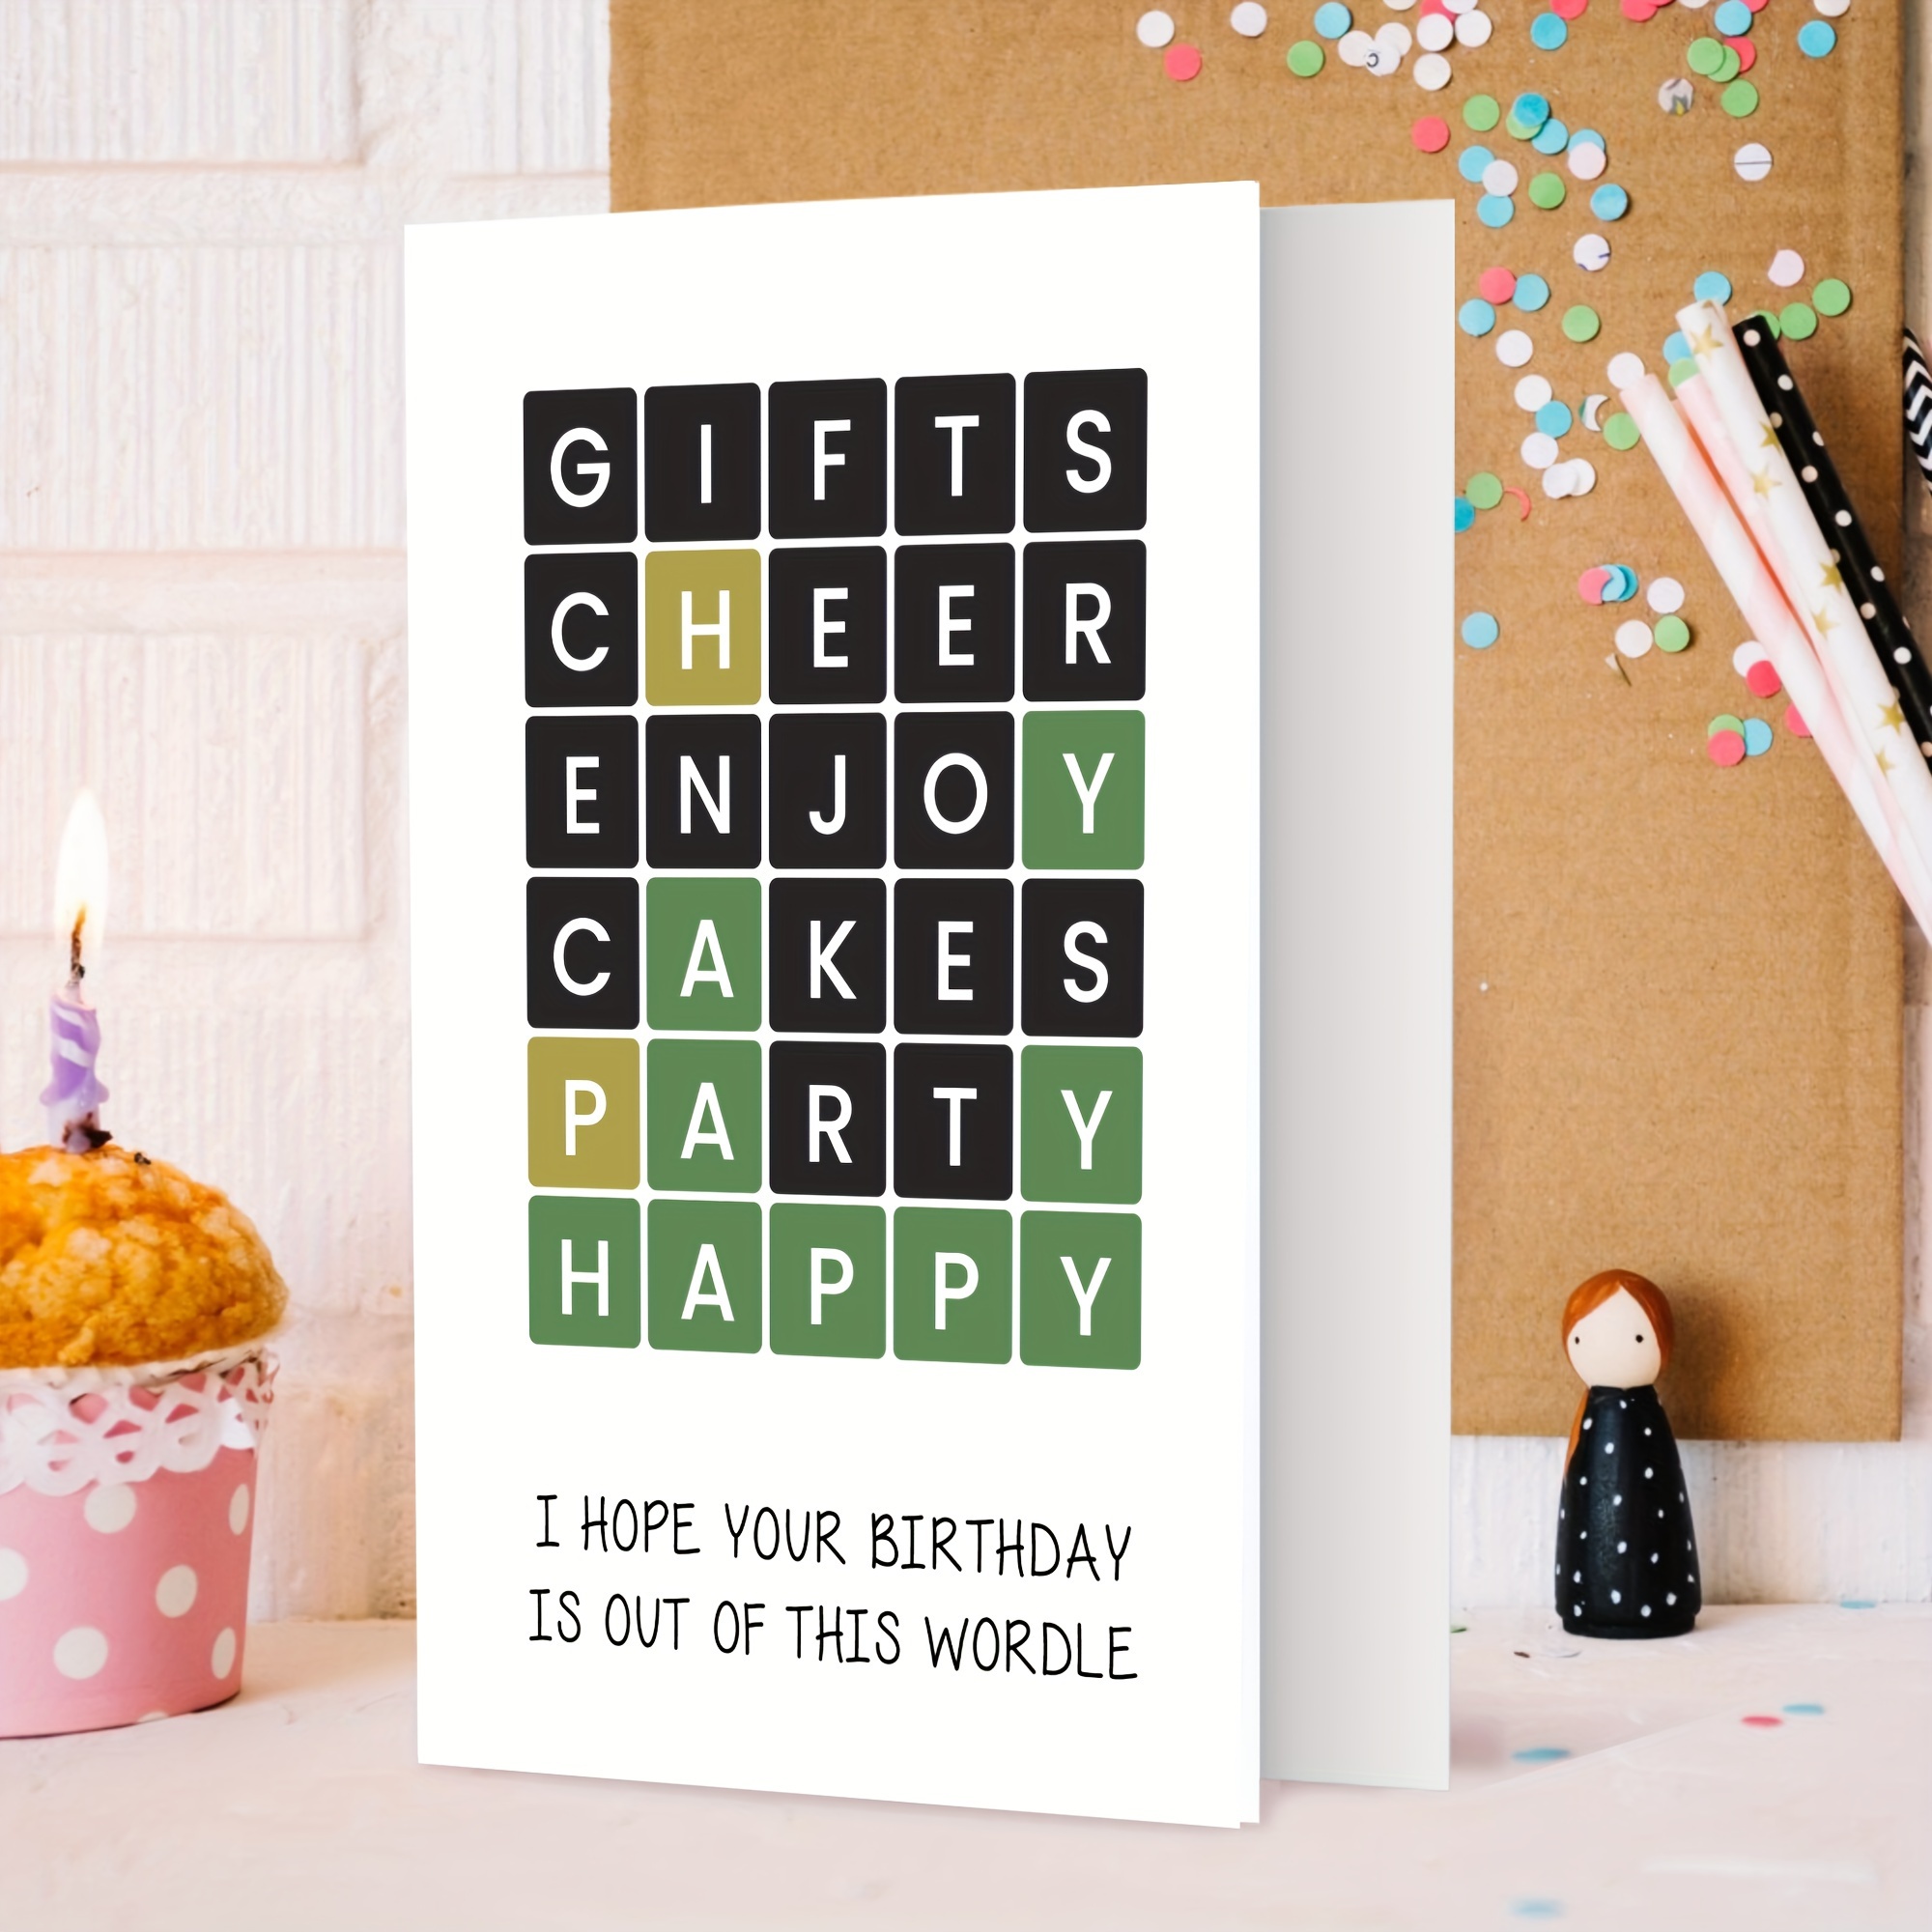 

I Your Birthday Is Out Of This Wordle - Wordle Birthday Cards, Note Cards, Funny Birthday Cards, Wordle Games, Word Games, New York Times